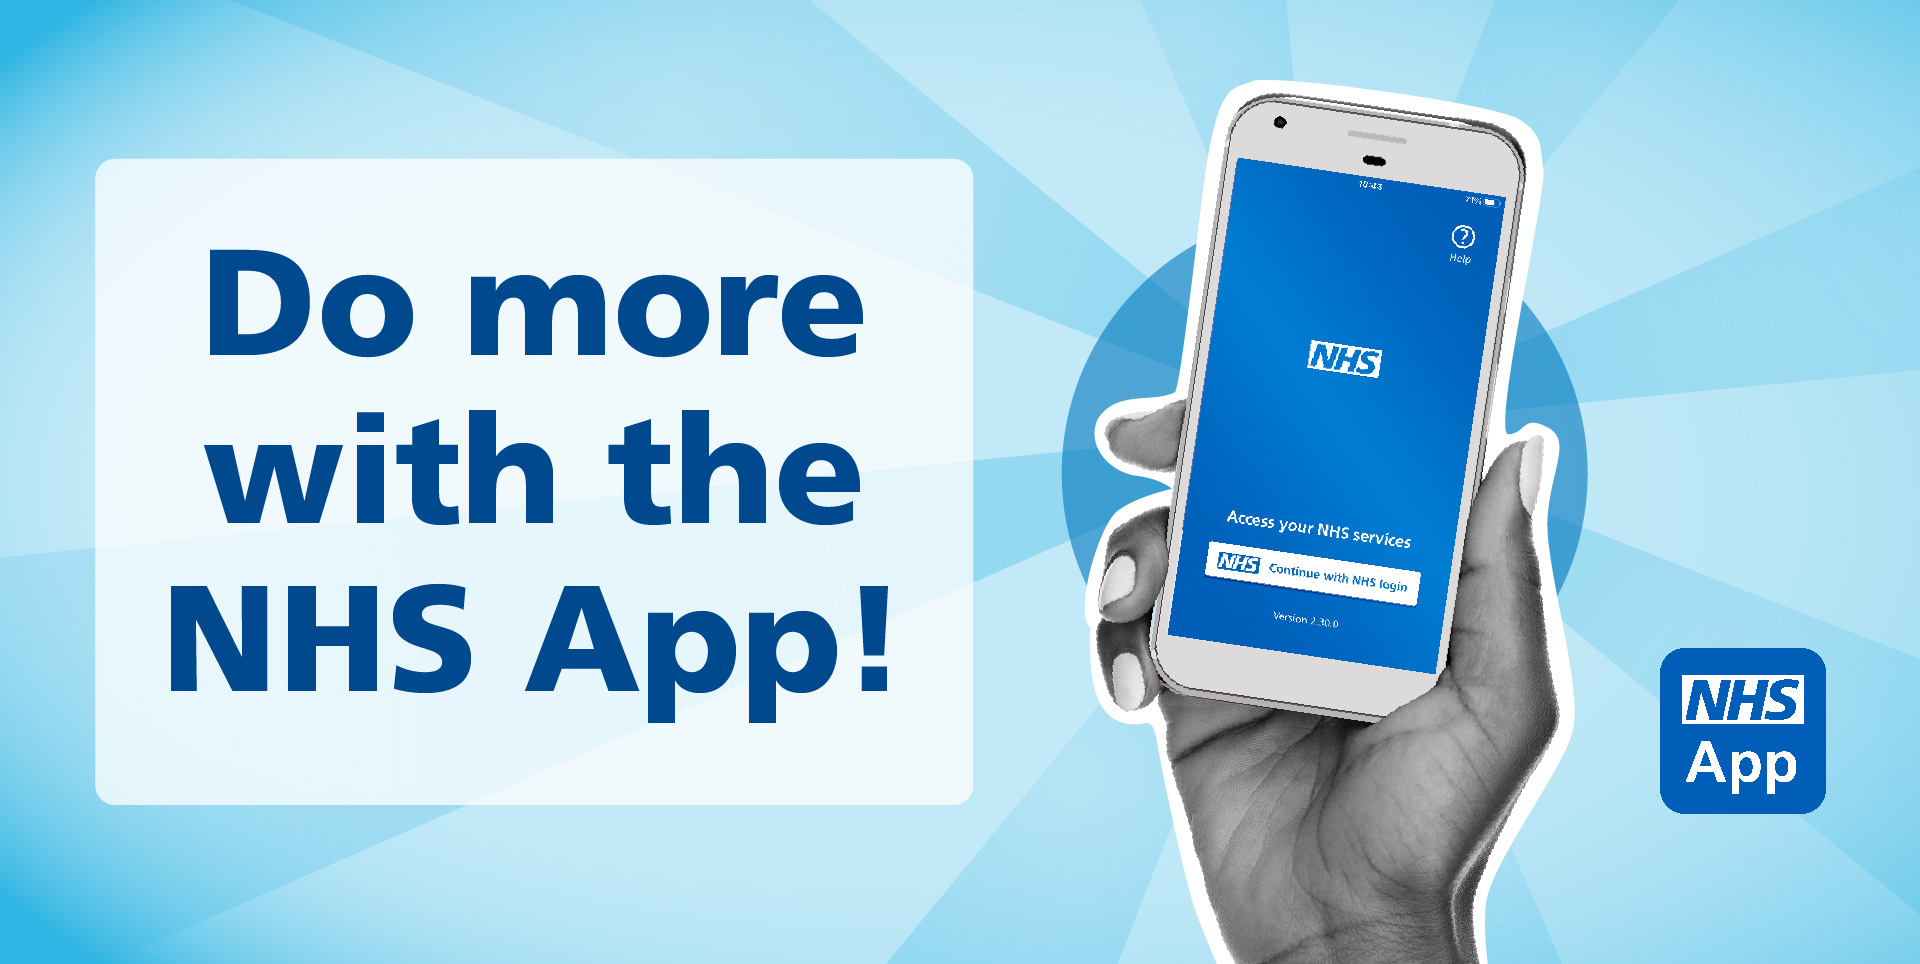 Do more with the NHS App!